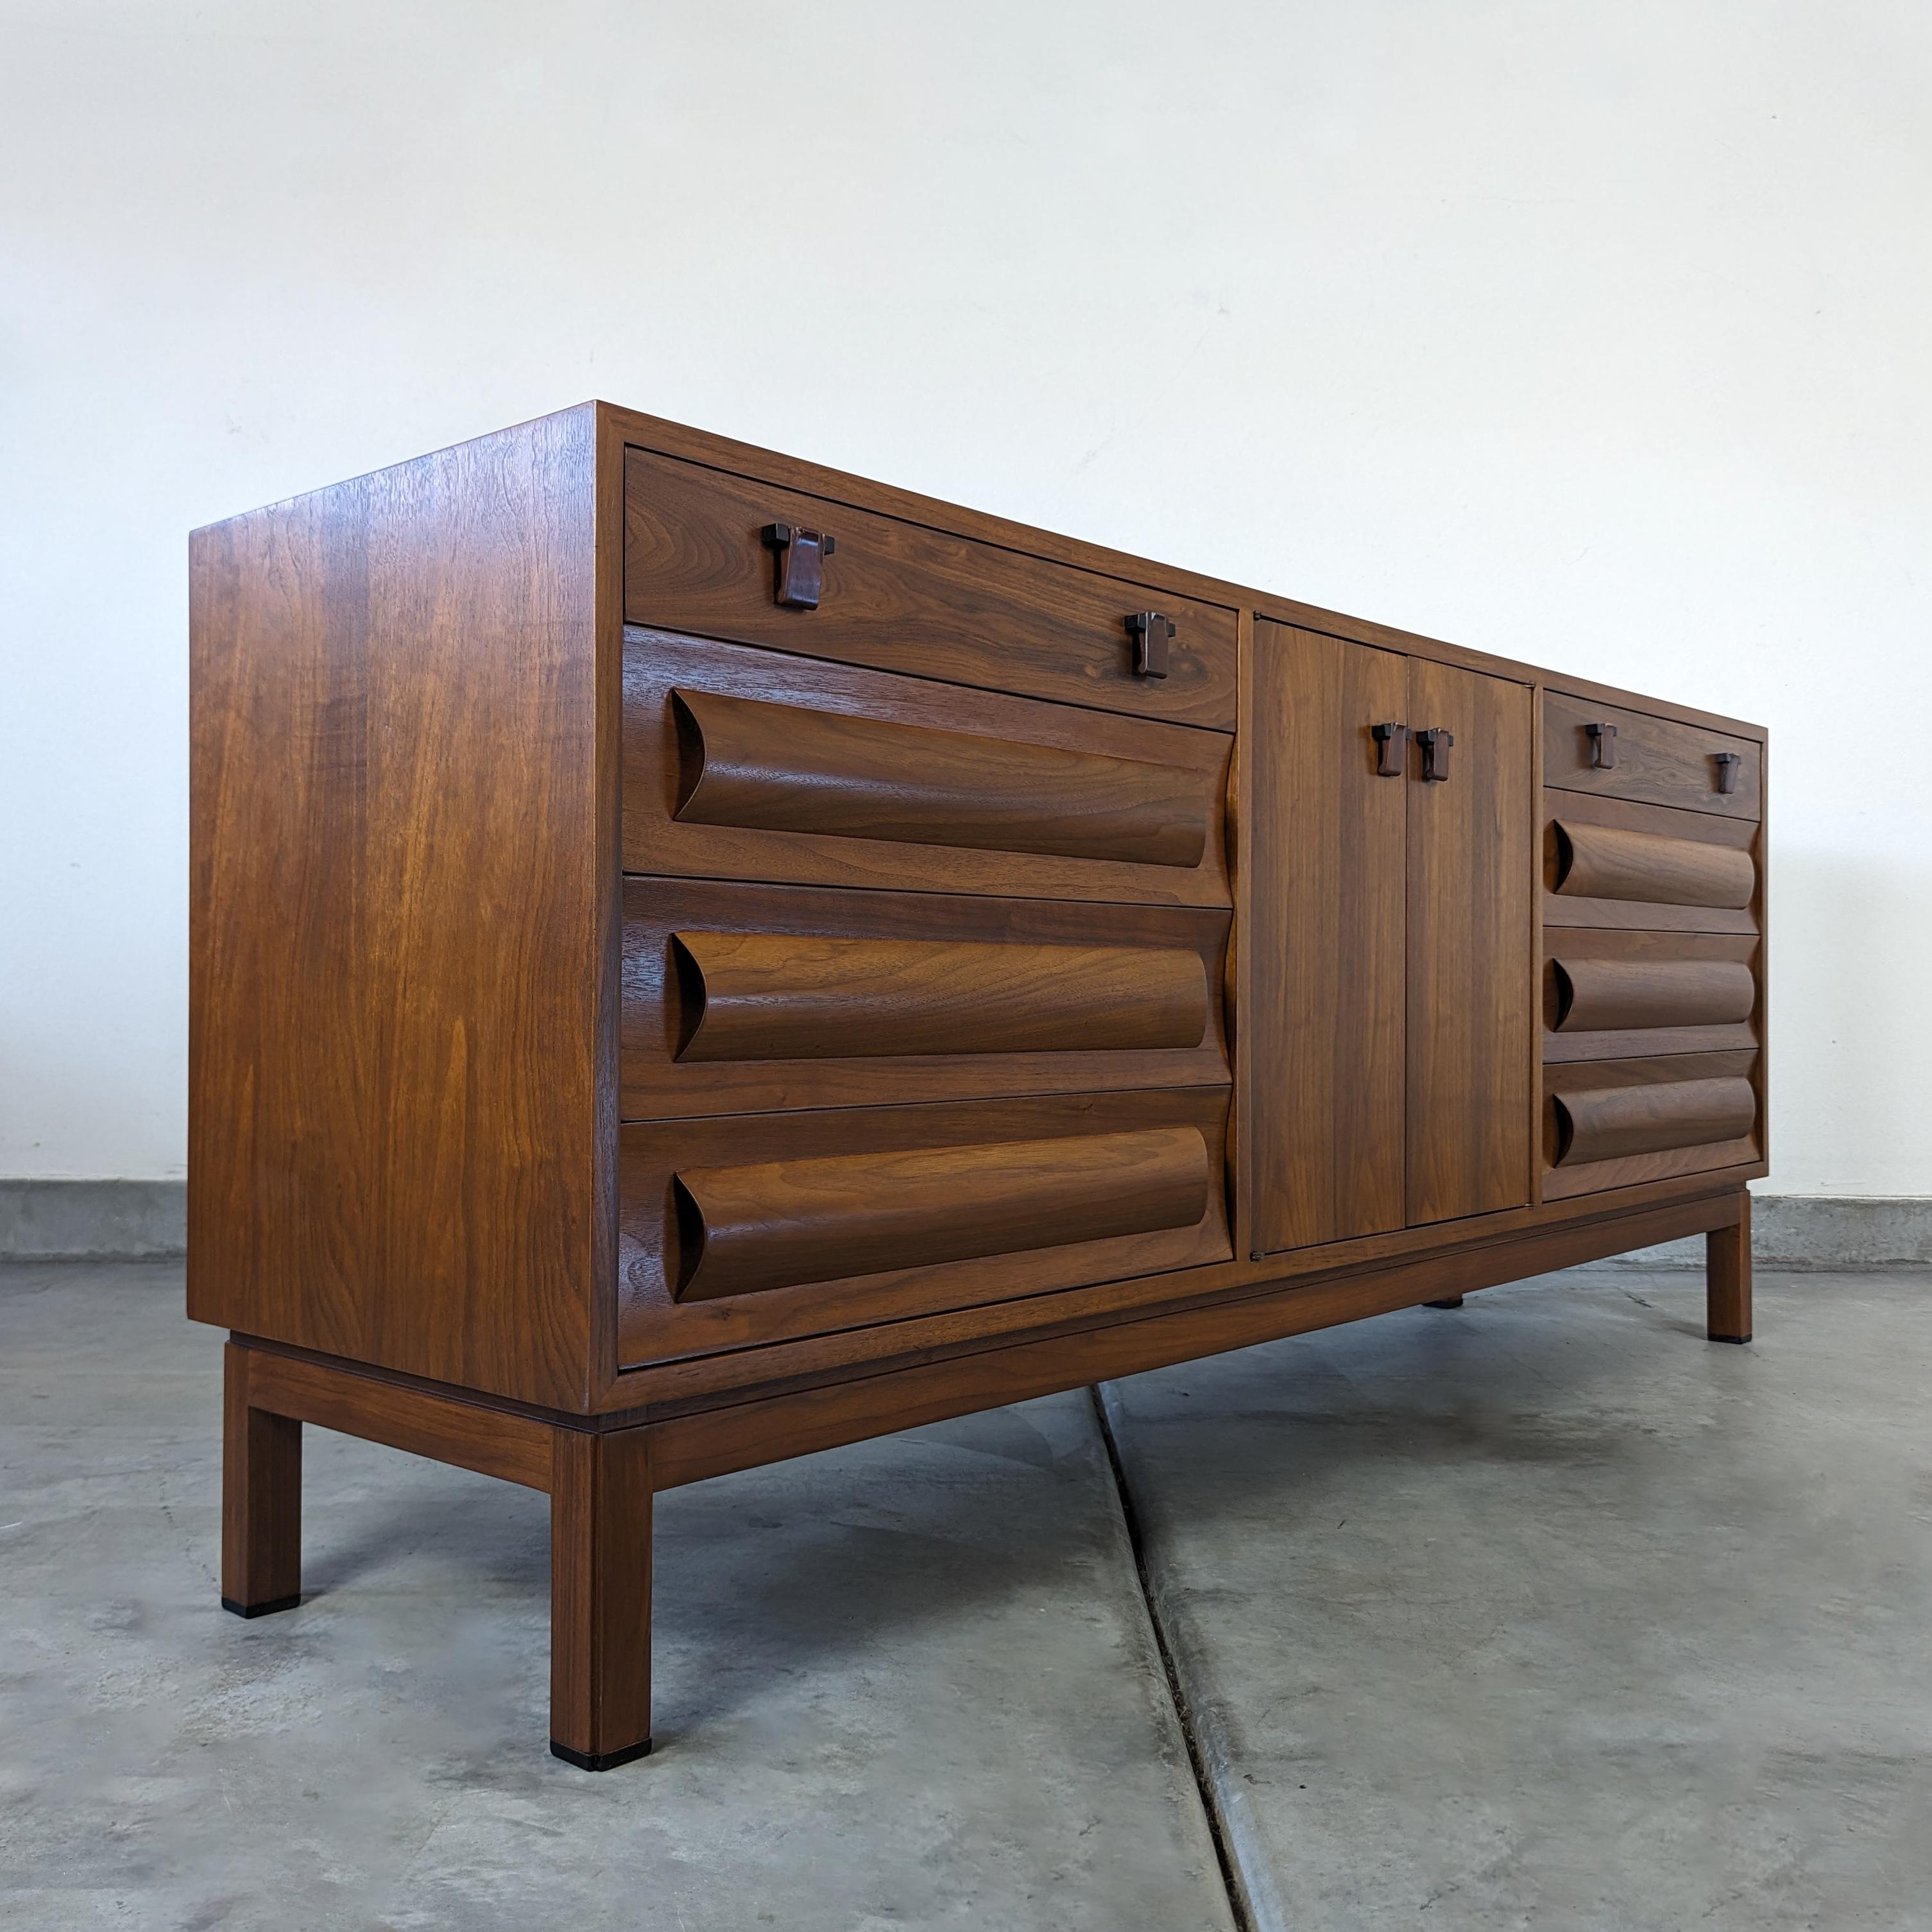 Delve into the world of timeless elegance and sleek craftsmanship with this magnificent Mid-Century Modern credenza designed by renowned designer Edward Wormley for Dunbar. A true gem from the period, this piece exemplifies Wormley's knack for